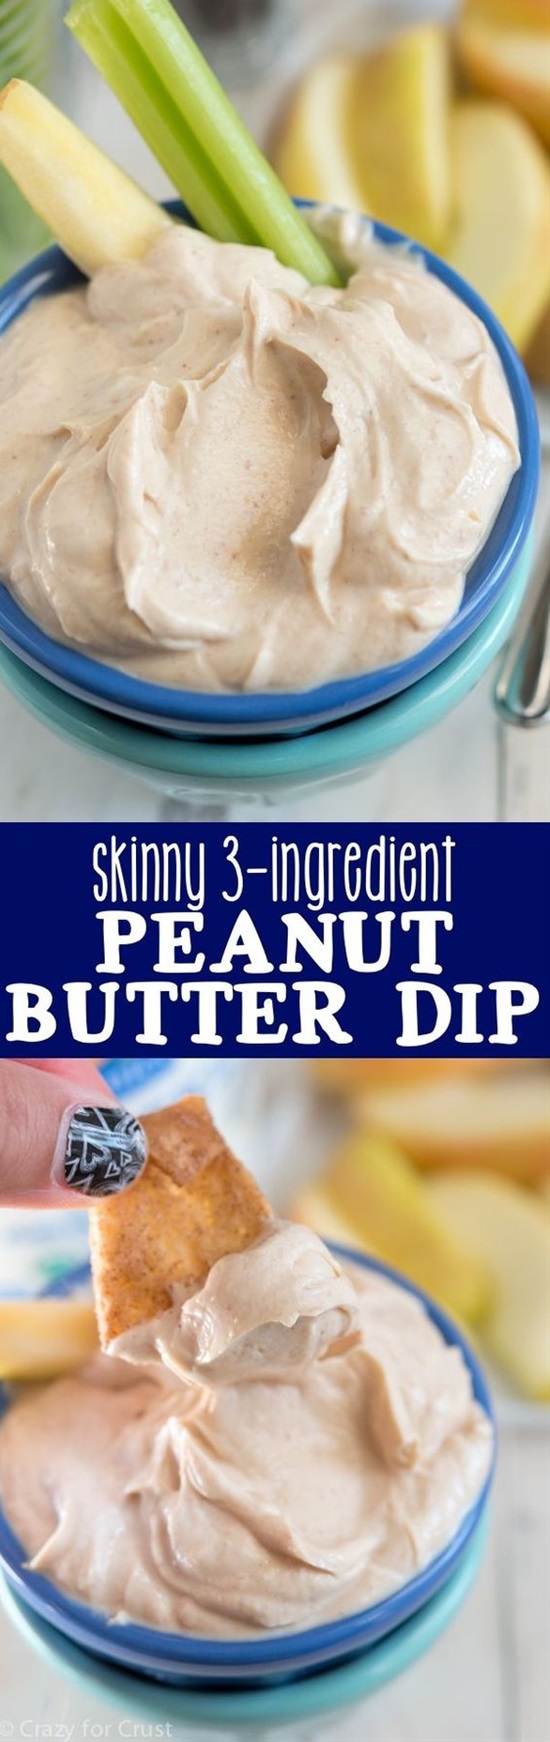 15 Things You Can Do With Peanut Butter - Peanut Butter recipes, Peanut Butter desserts, peanut butter, Desserts with Peanut Butter